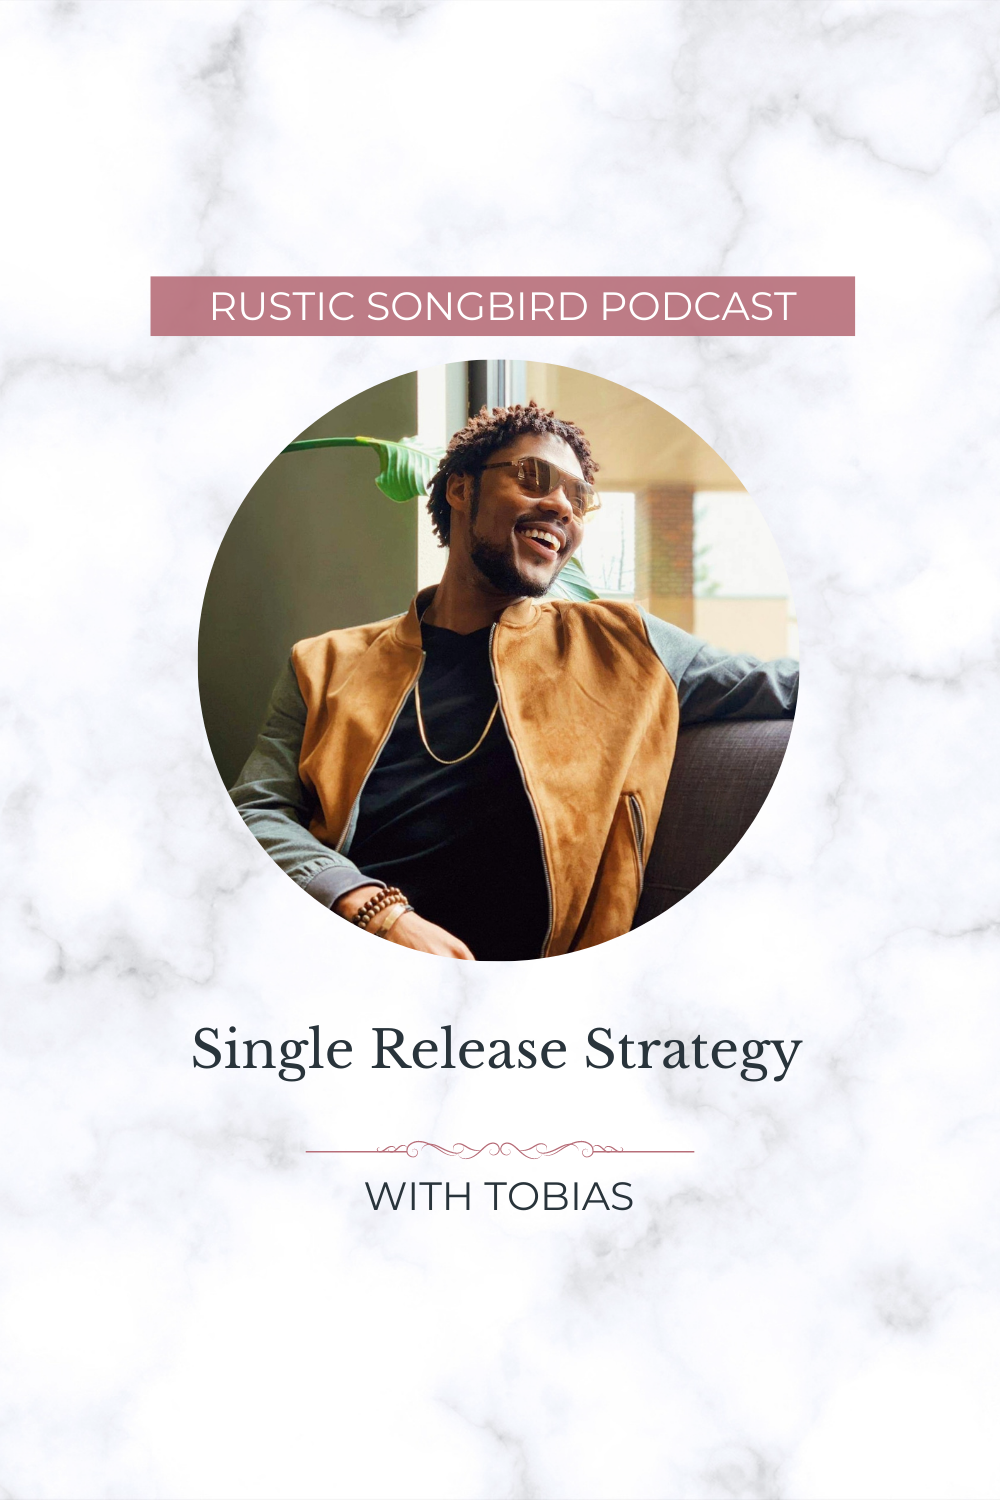 In this episode of the Rustic Songbird Podcast, host Lydia Walker interviews worship singer Tobias about his strategy to release a song every month in 2021!